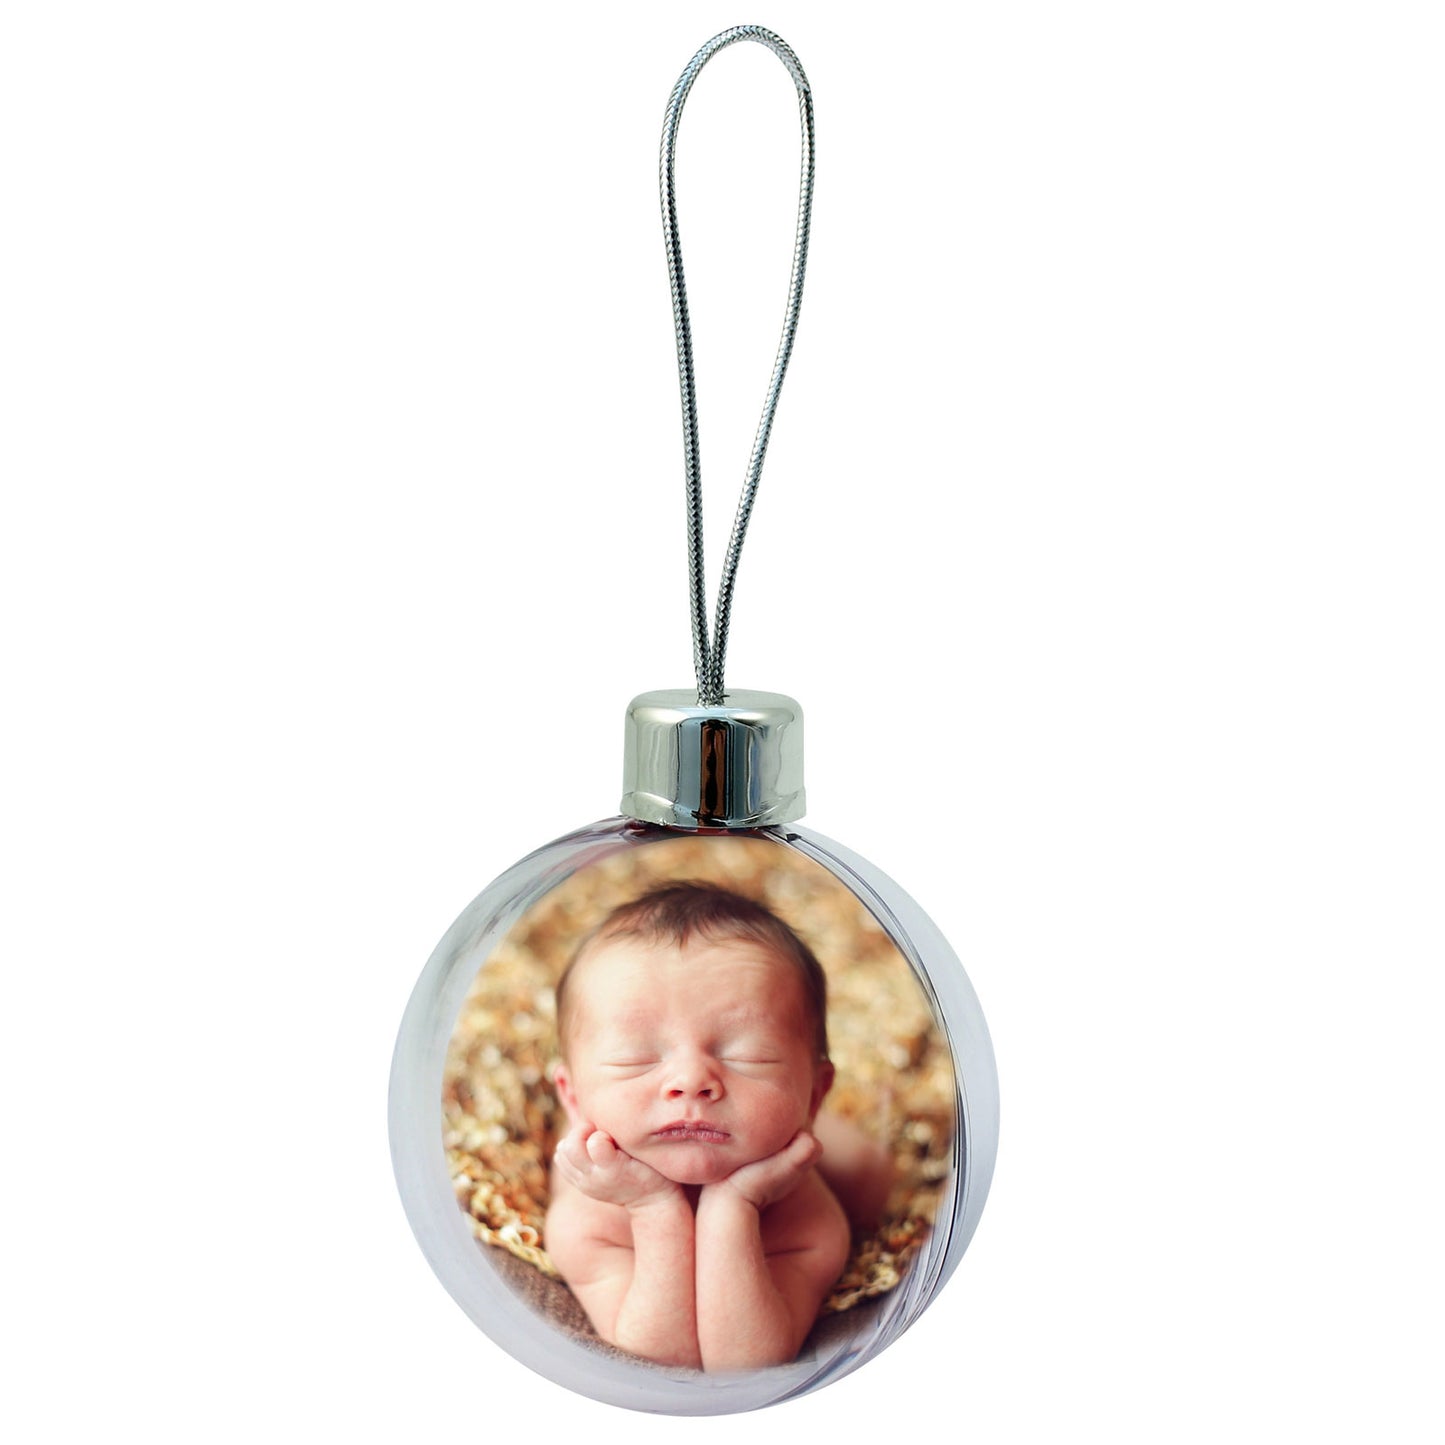 Personalised photo bauble (NEW)